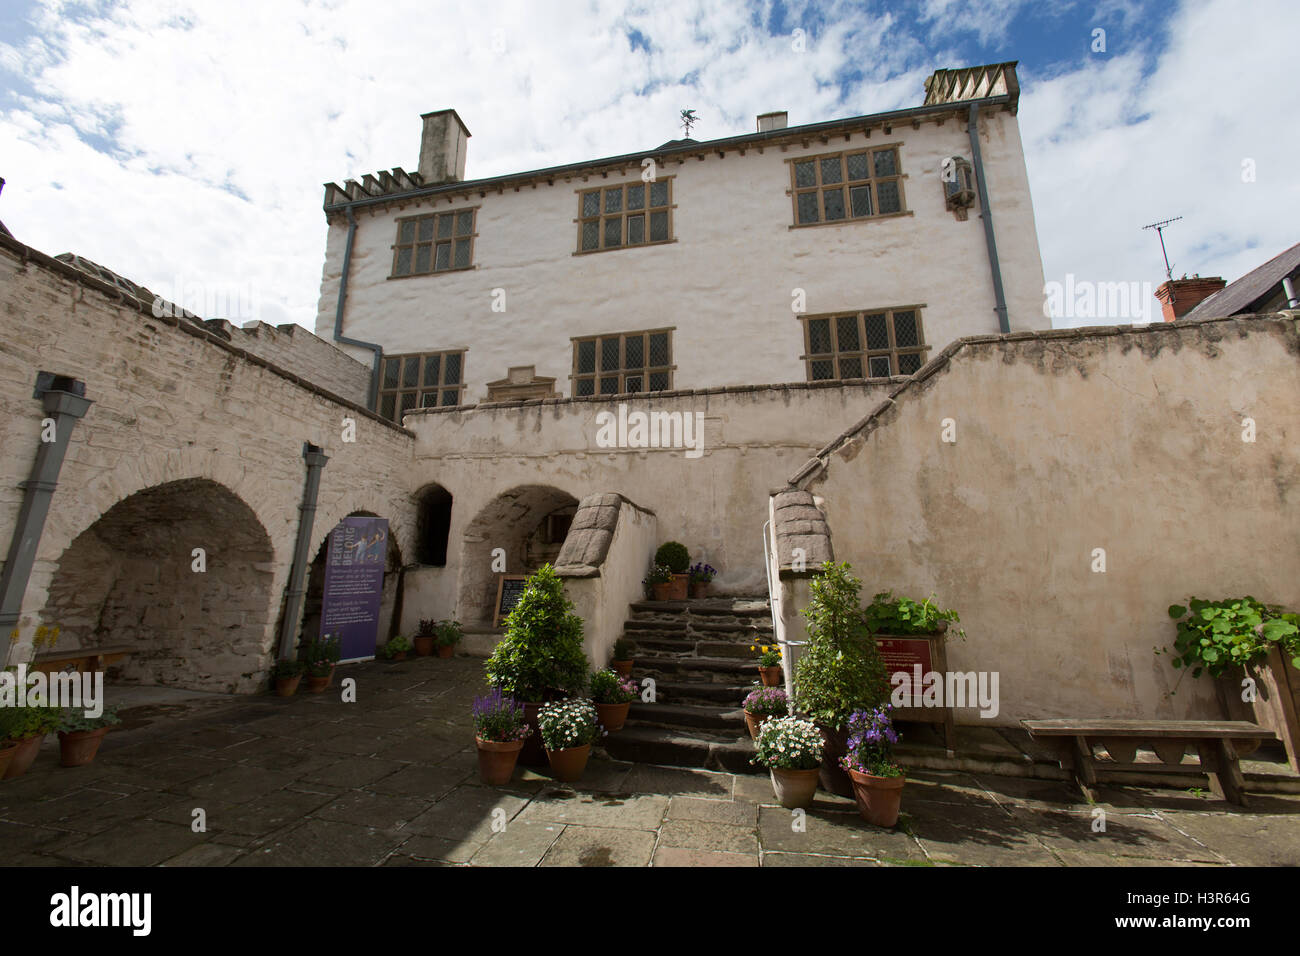 Town of Conwy, Wales. Picturesque view of the Elizabethan period Plas Mawr on Conwy’s High Street. Stock Photo